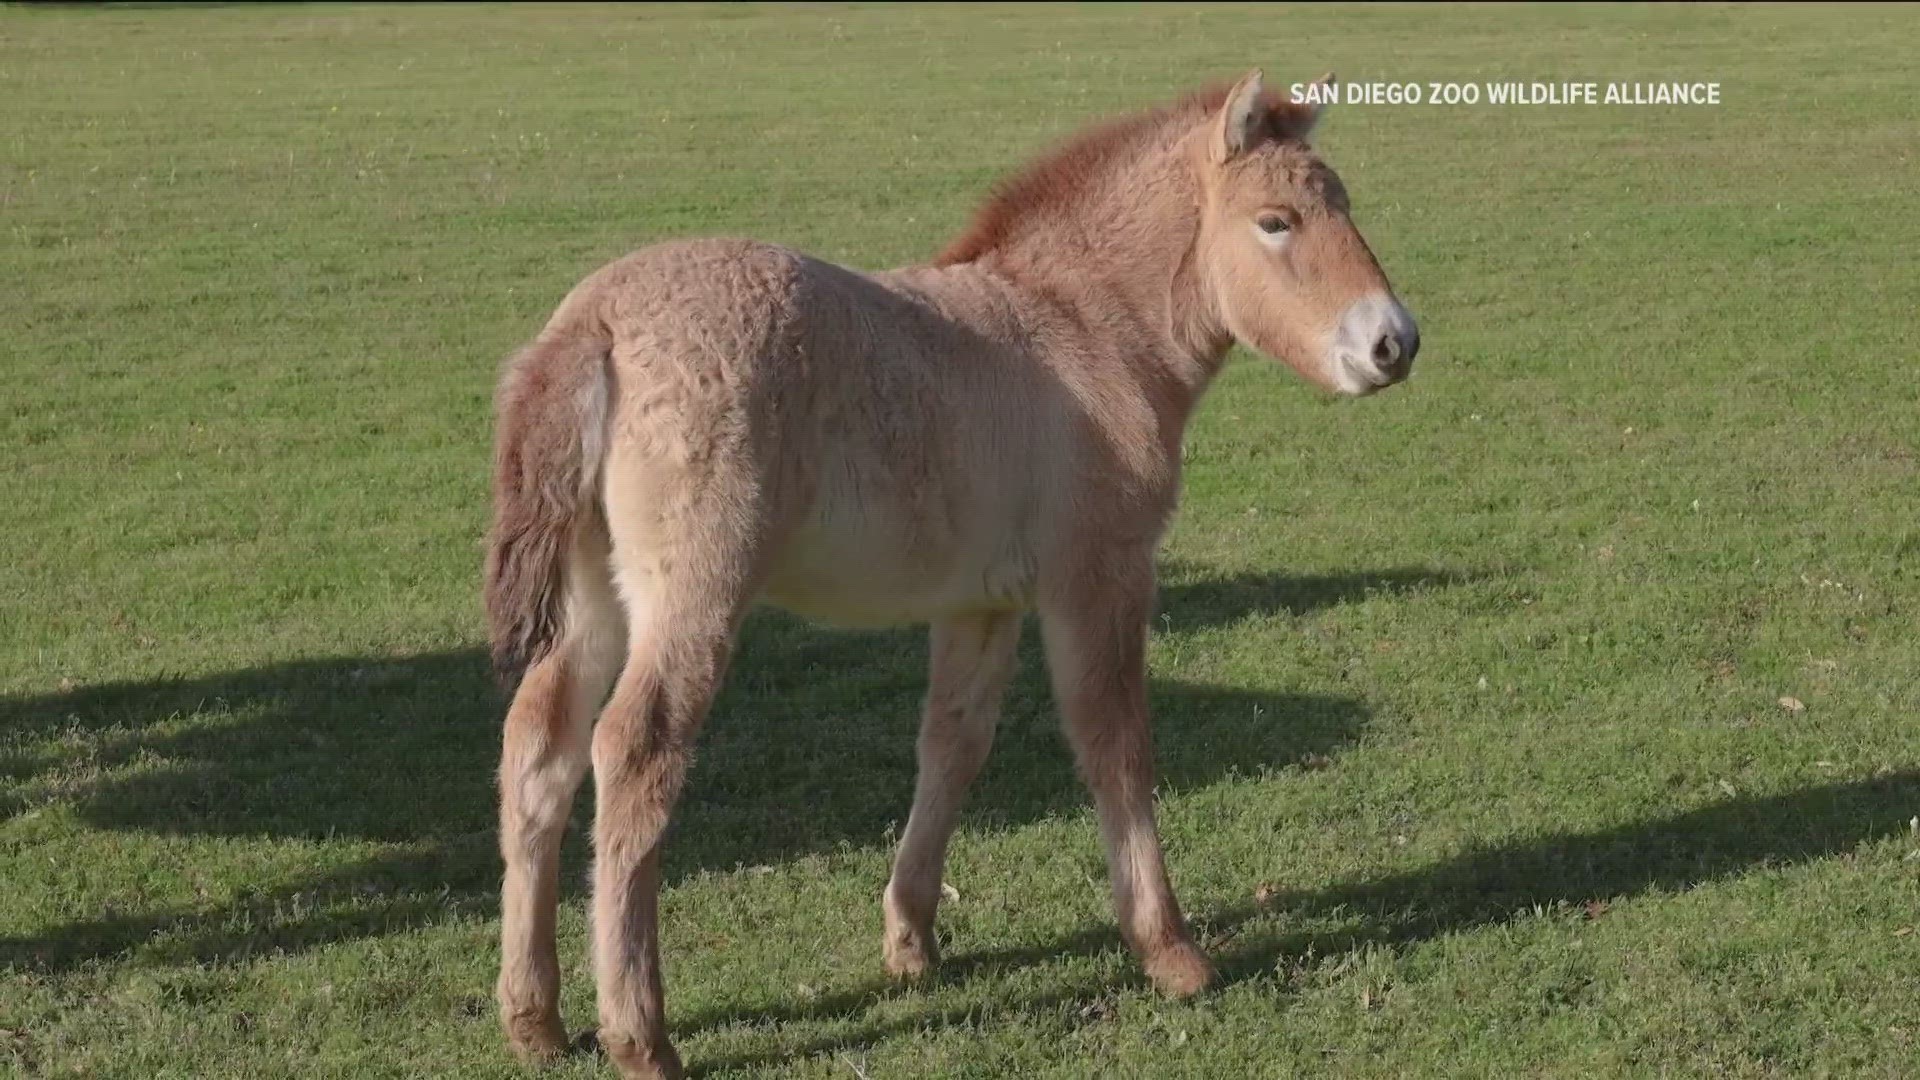 The endangered foal was born at a cloning facility in Texas and will join its genetic twin at the San Diego Zoo Safari Park